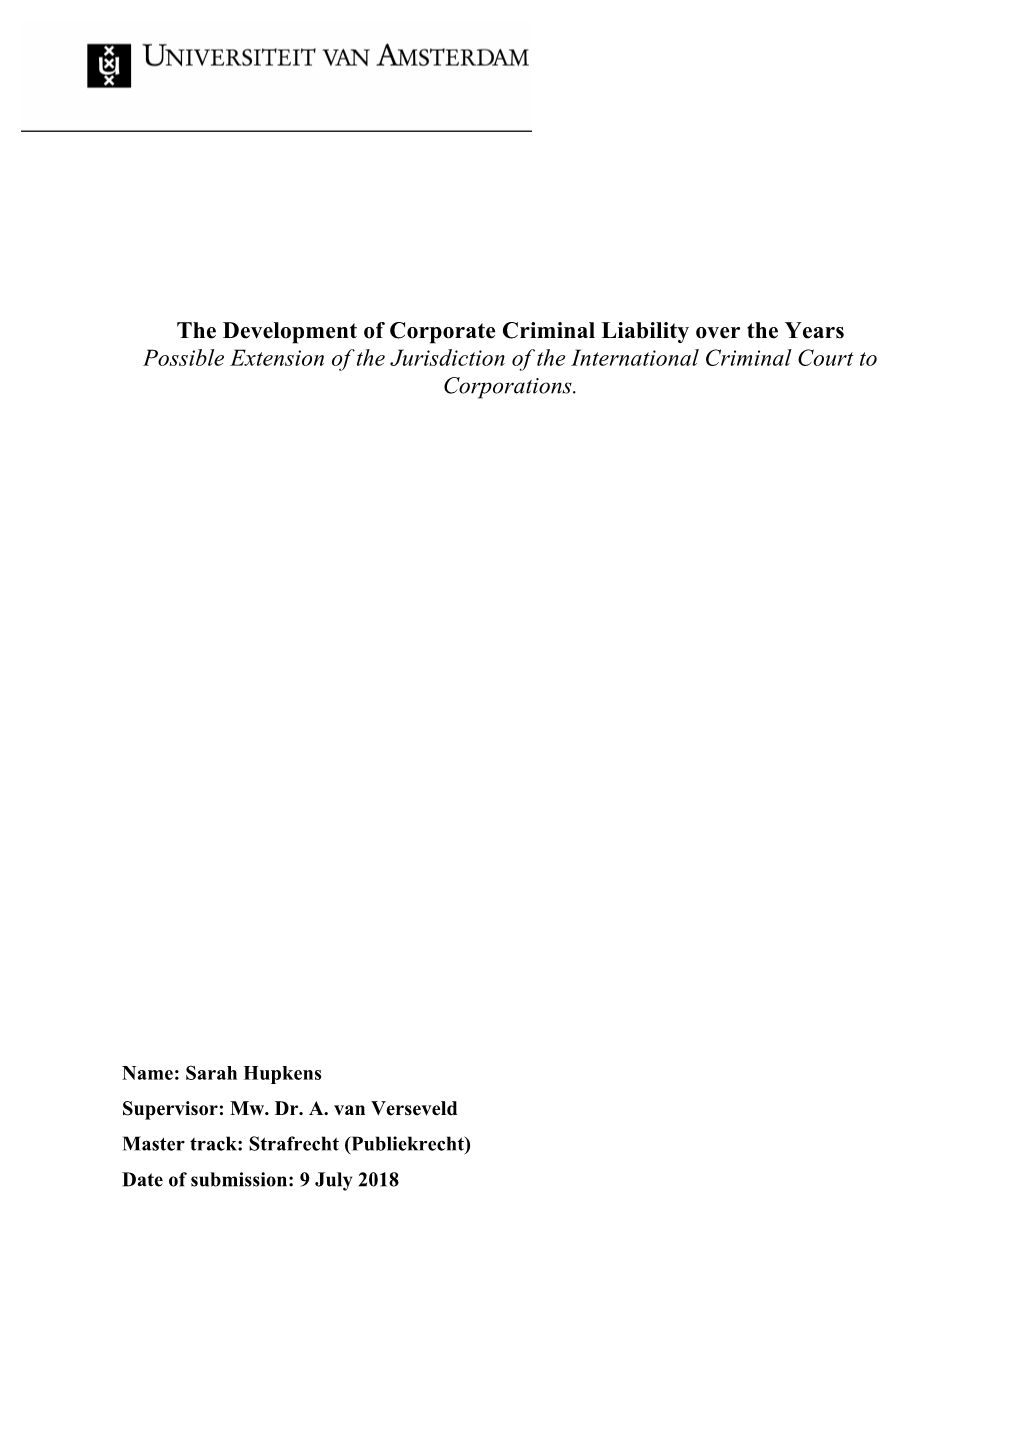 The Development of Corporate Criminal Liability Over the Years Possible Extension of the Jurisdiction of the International Criminal Court to Corporations